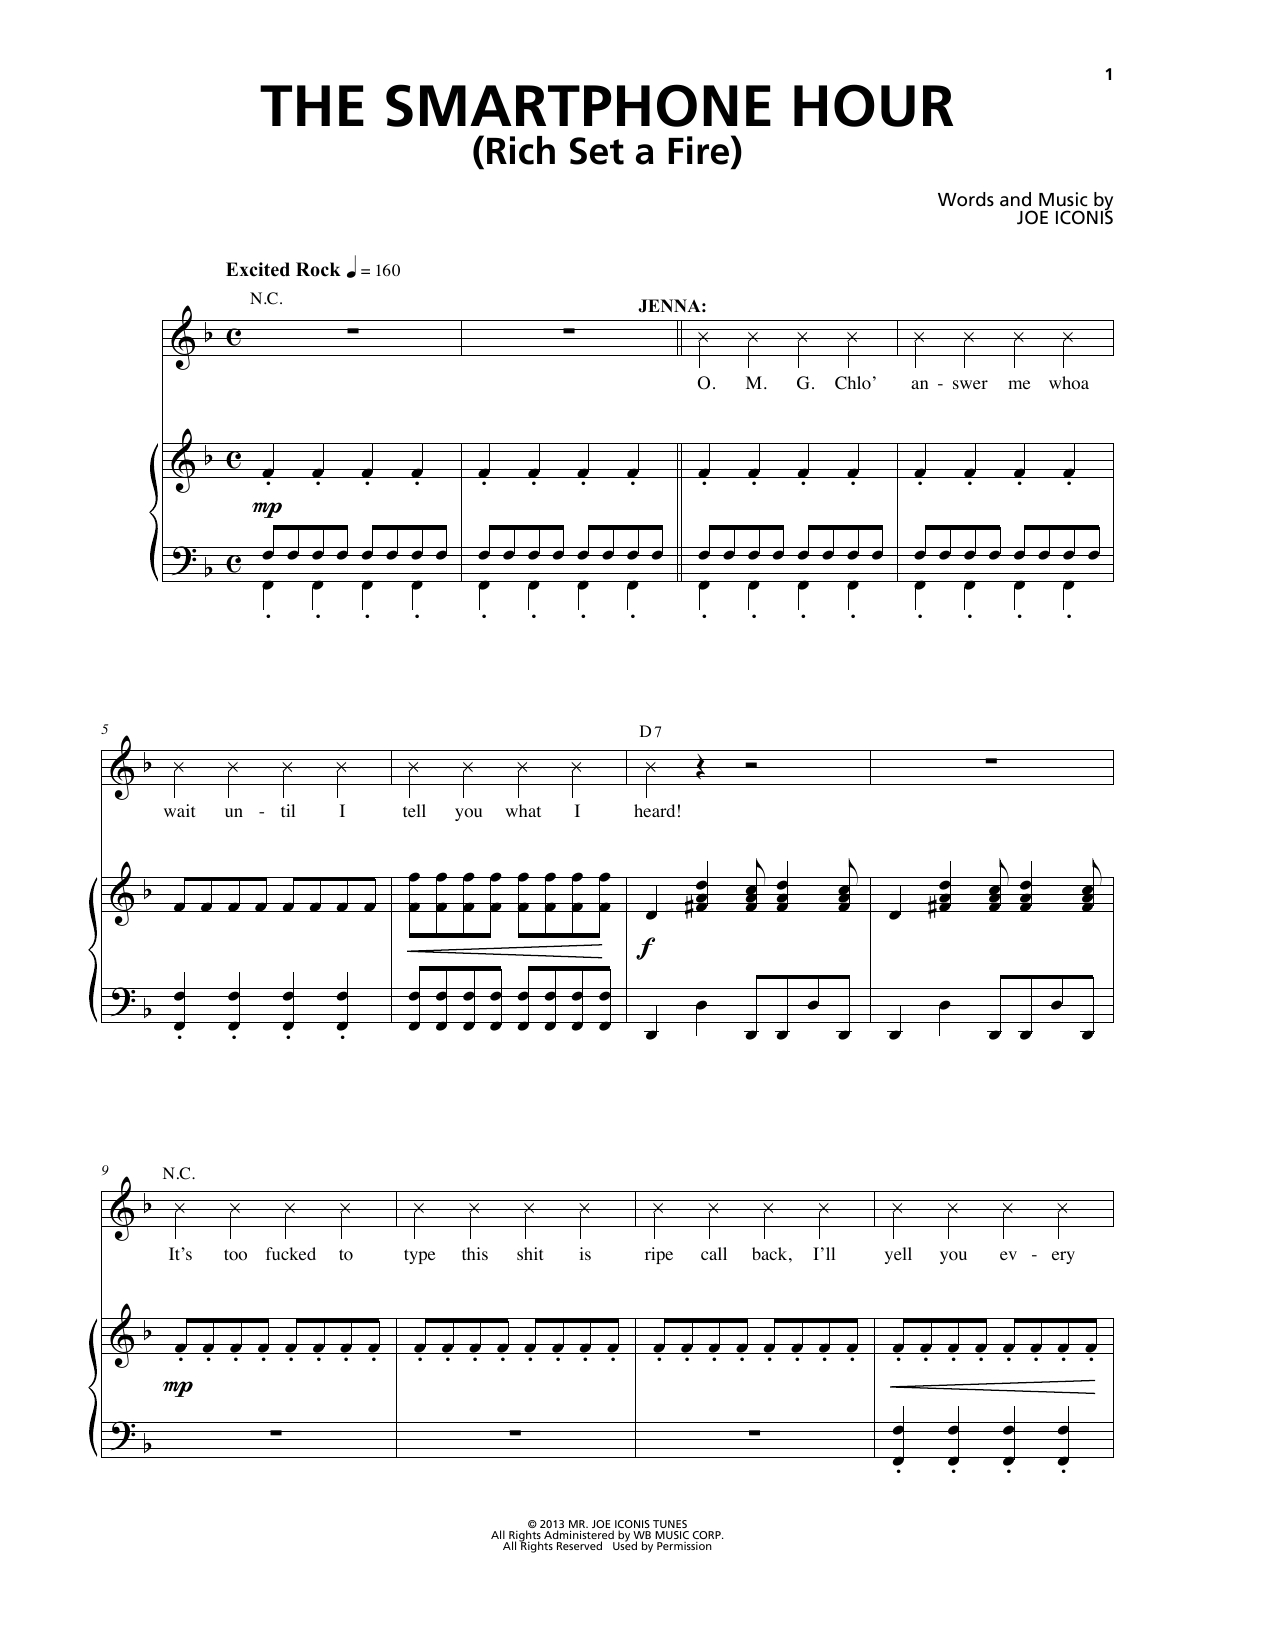 Set A Fire Chords Joe Iconis The Smartphone Hour Rich Set A Fire Sheet Music Notes Chords Download Printable Piano Vocal Sku 188962